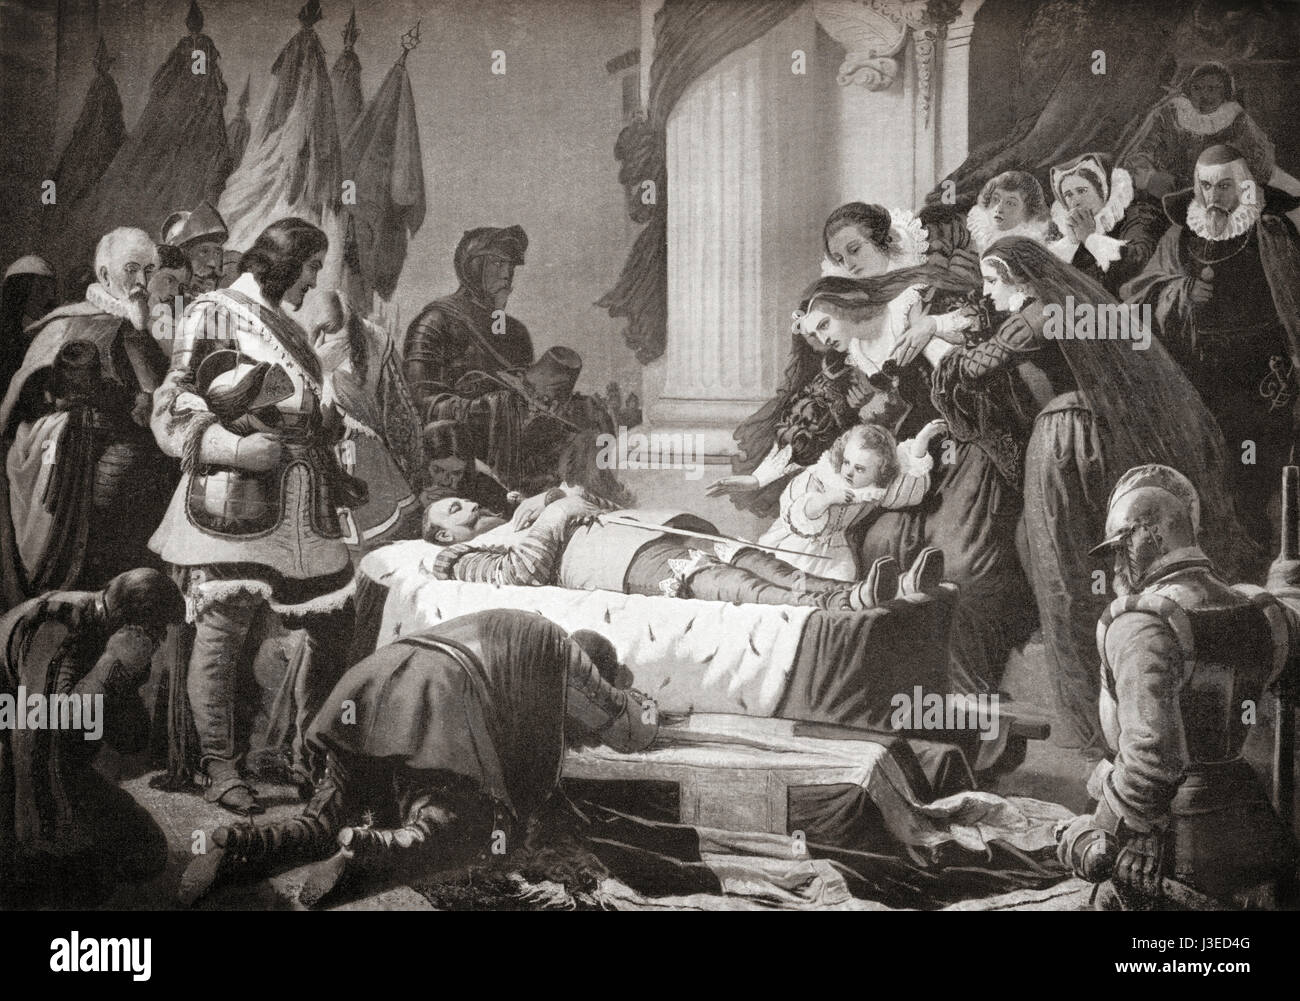 The grief of Maria Eleonora of Brandenburg at the lying- in-state of her deceased husband Gustav II Adolf, 1632.   Gustav II Adolf, 1594 – 1632, aka Gustavus Adolphus or Gustav II Adolph.  King of Sweden.  Maria Eleonora of Brandenburg, 1599 – 1655. German princess and queen consort of Sweden.  From Hutchinson's History of the Nations, published 1915. Stock Photo